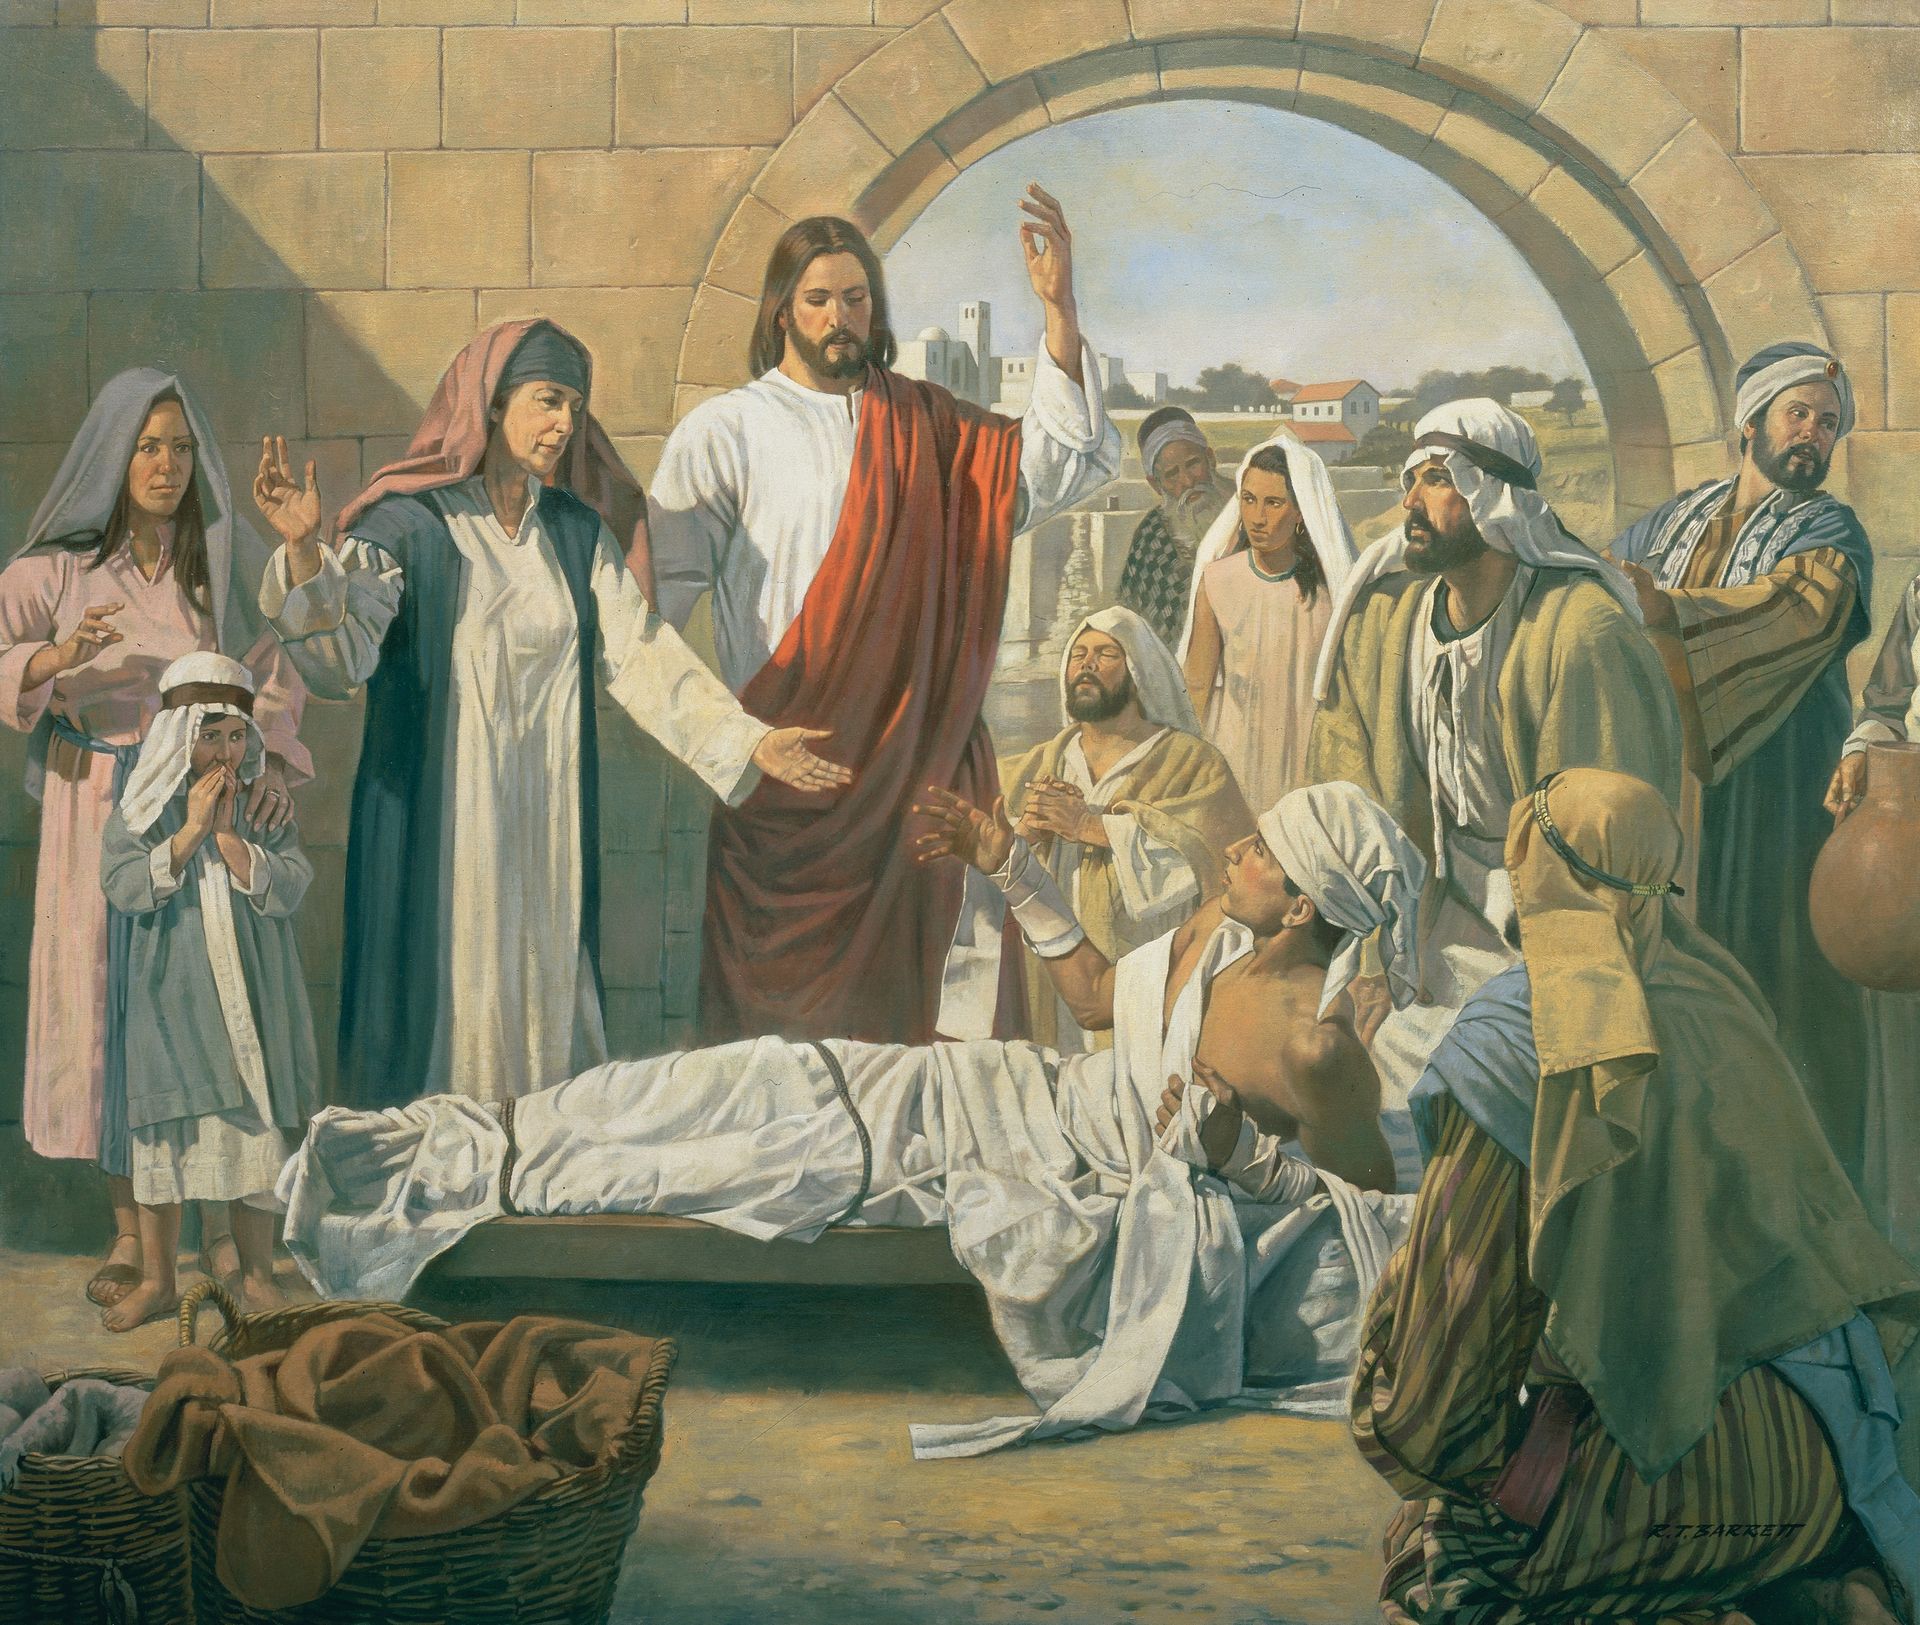 Christ Raises the Son of the Widow of Nain, by Robert T. Barrett